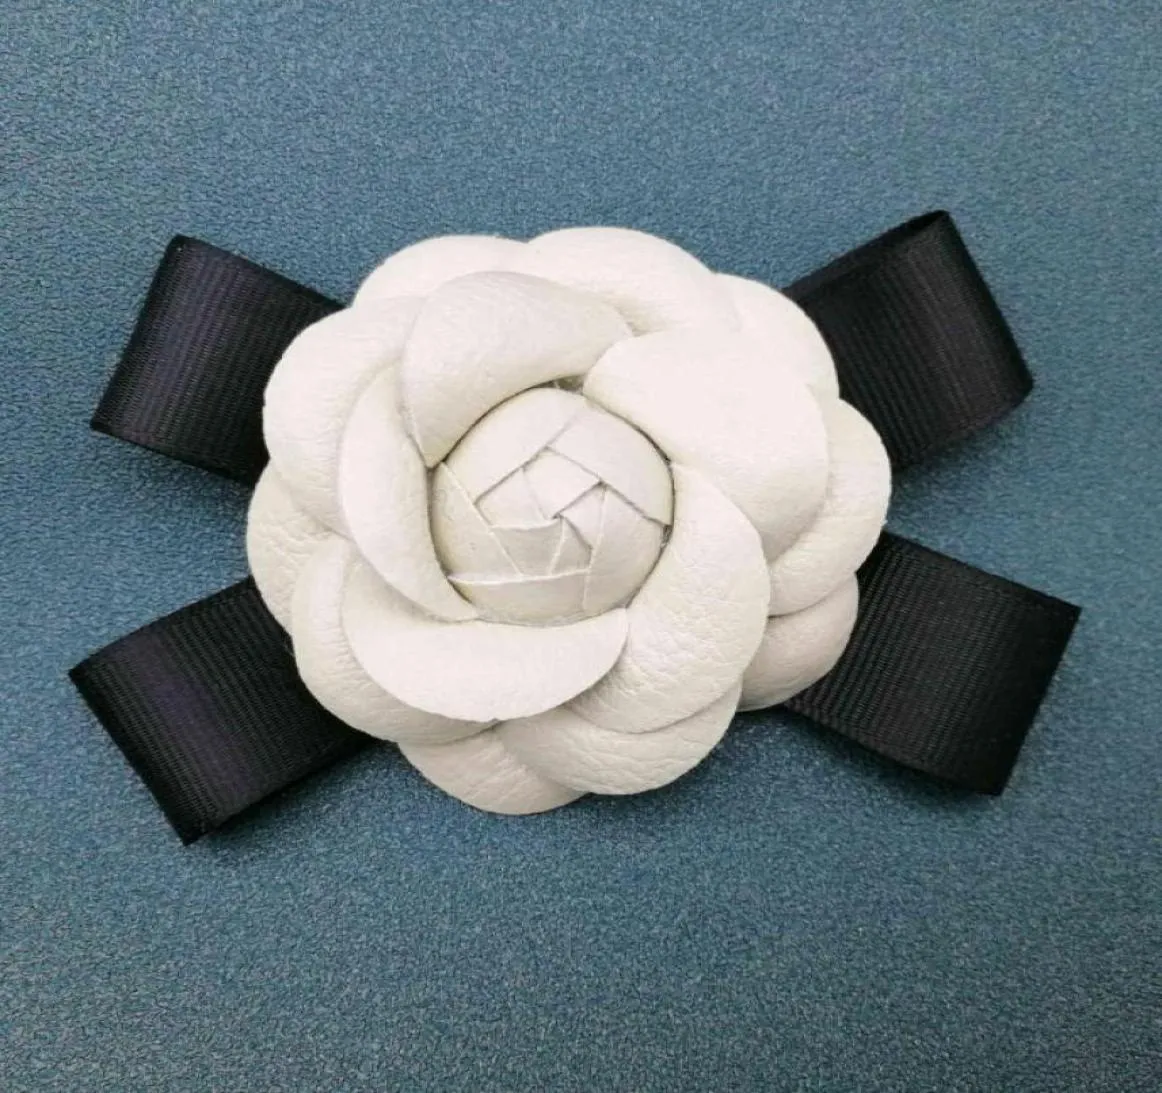 Fashion Black Bow Fabric Camellia Flower Brooch Pin Wedding Party Costume Jewelry Accessories Big Brooches for Women Gifts59150783243221